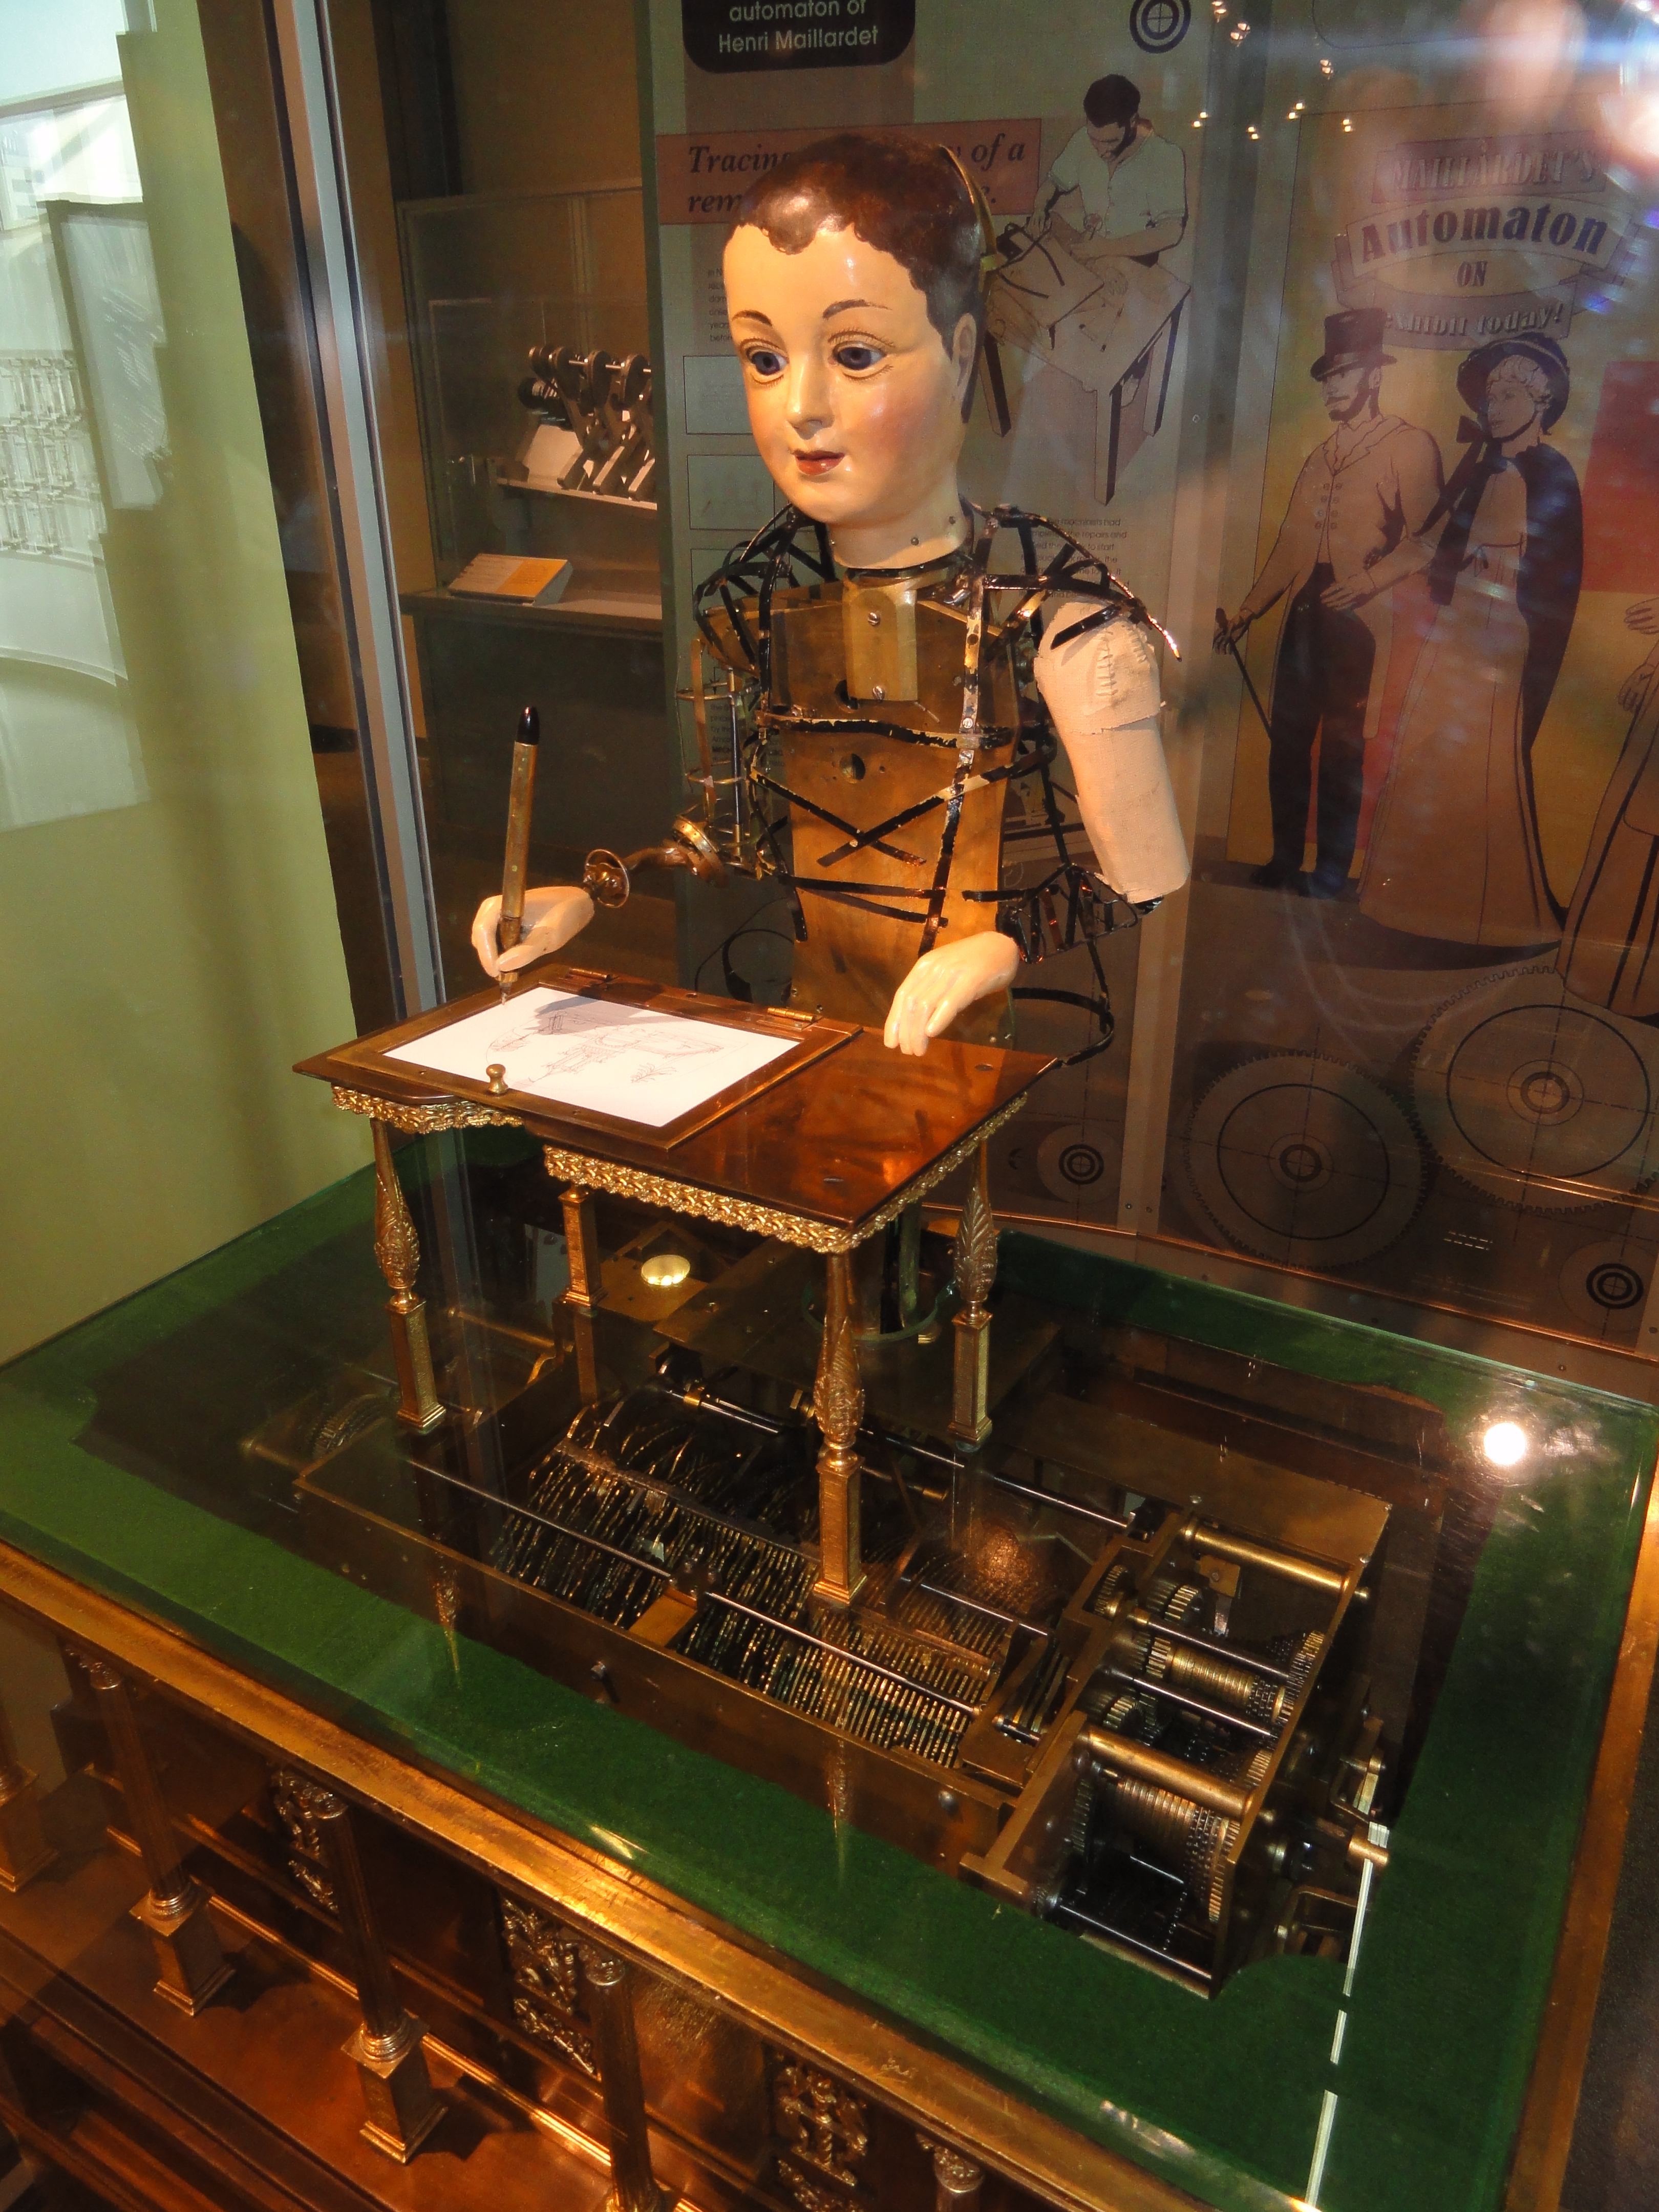 Maillardet's Jeune Enfant without the costume it wears in the video. The very elaborate cam memory is stored in the cabinet beneath the desk.